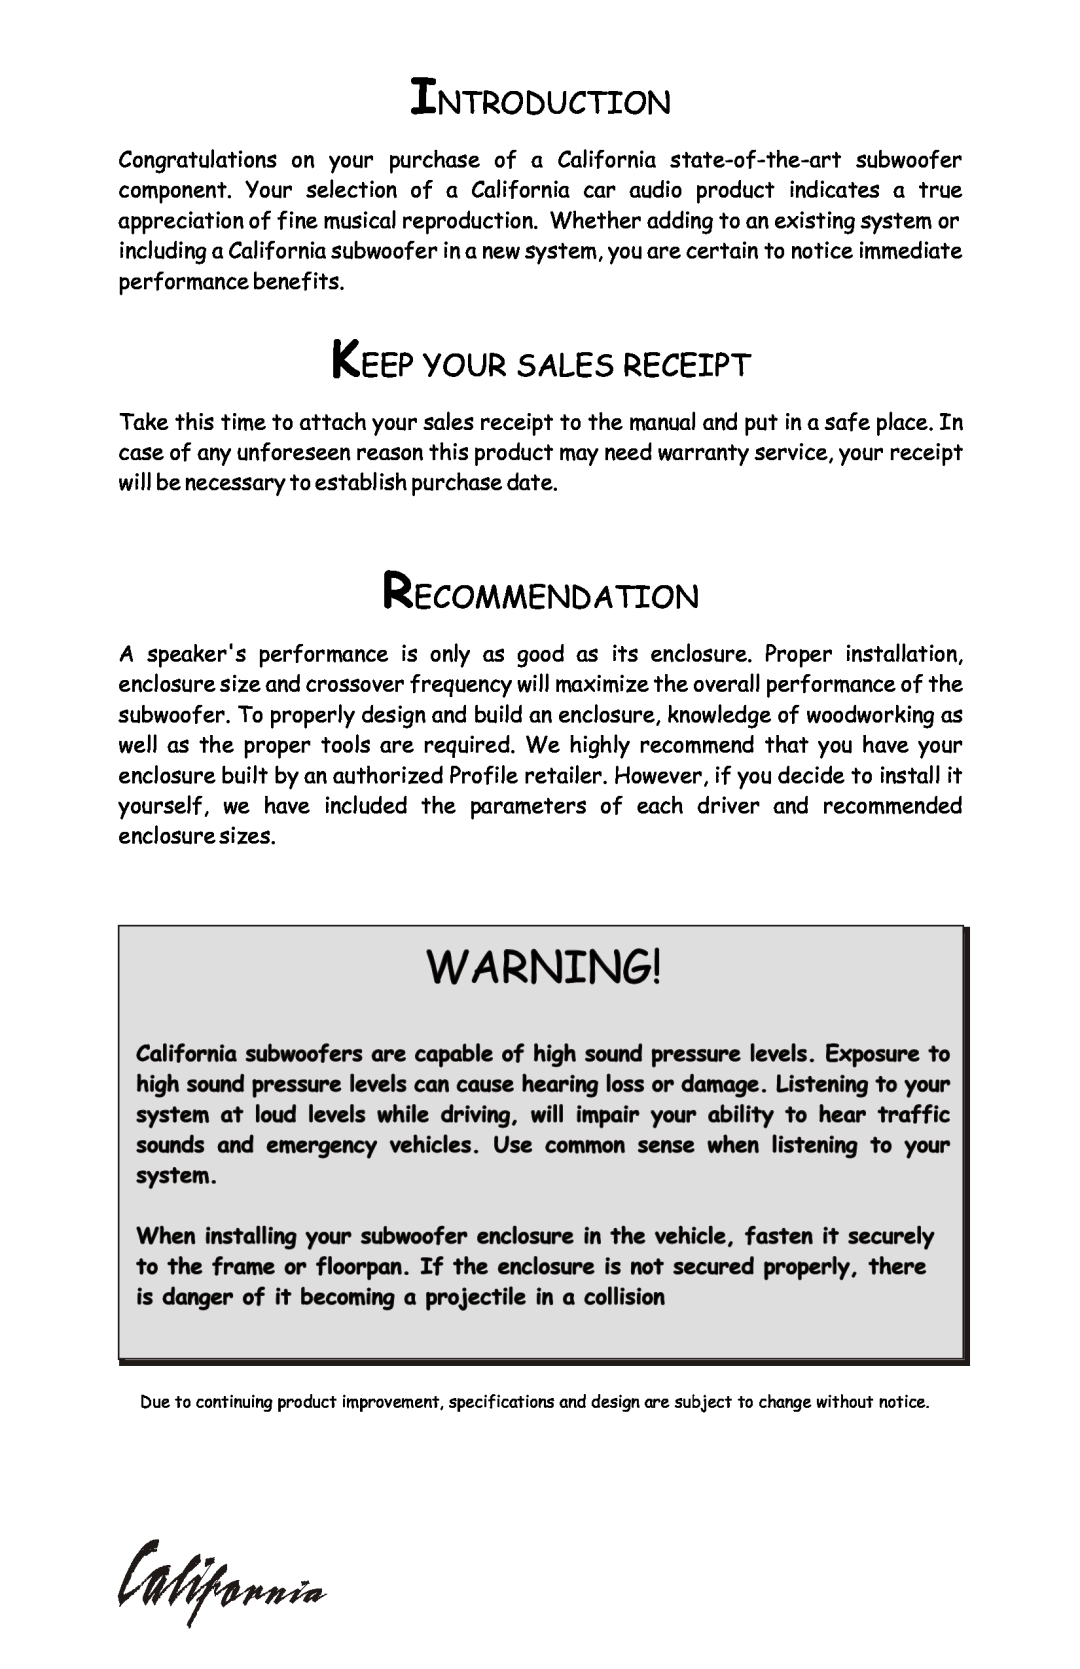 Profile CZ12 installation instructions Introduction, Keep Your Sales Receipt, Recommendation 